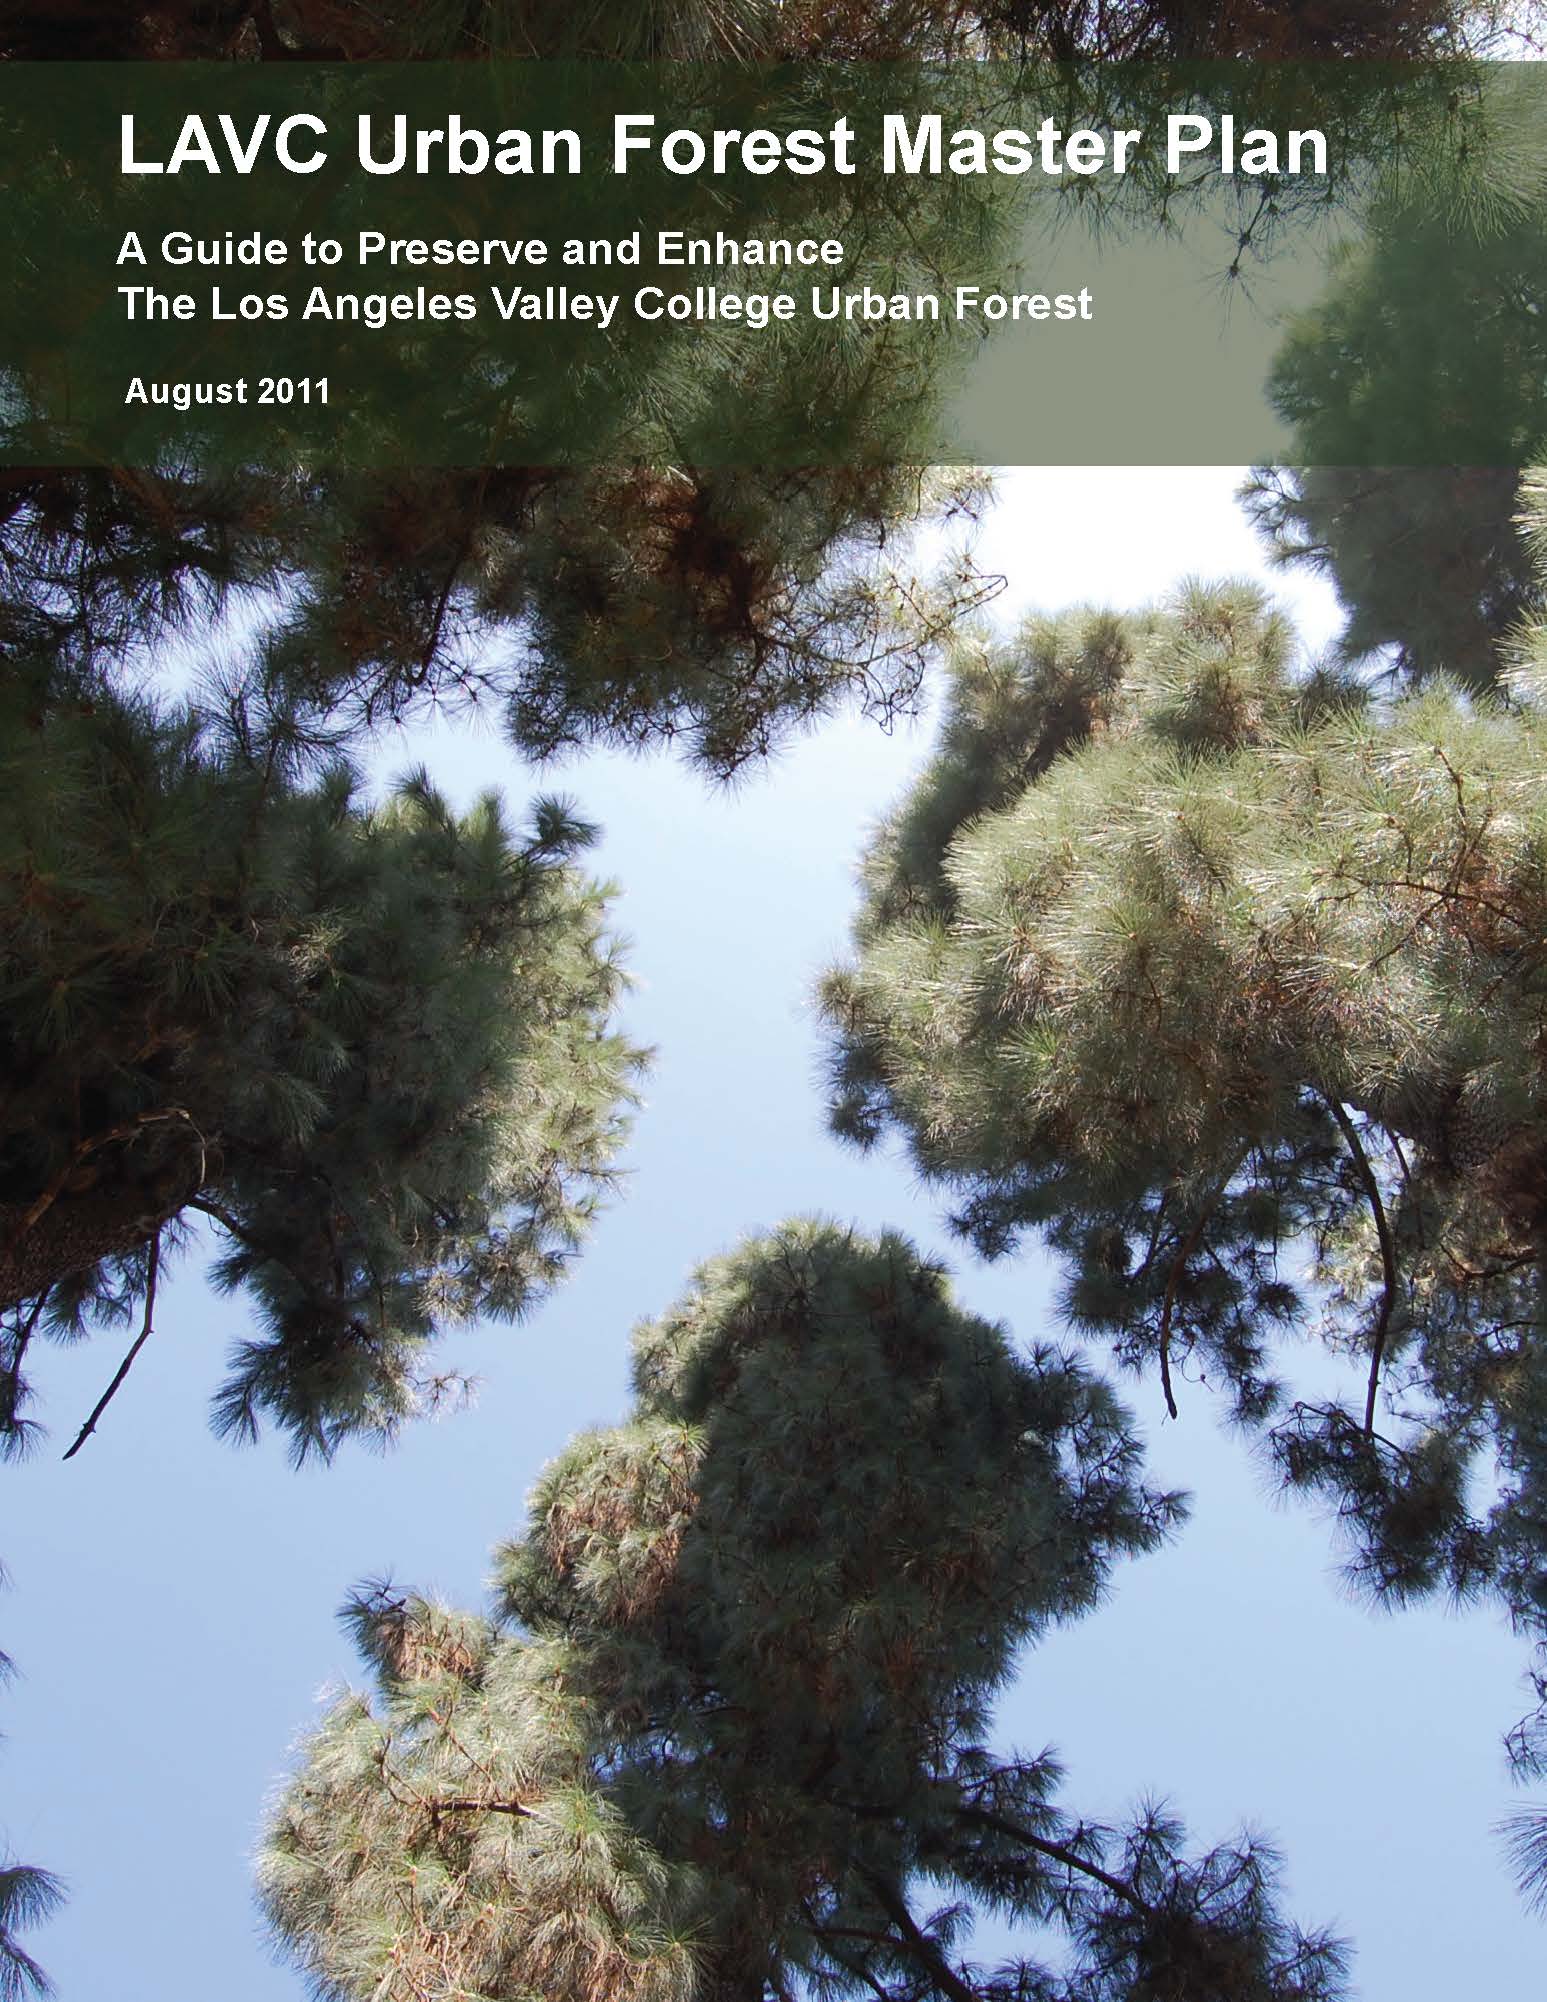 Cover Page of the LAVC Urban Forest Master Plan